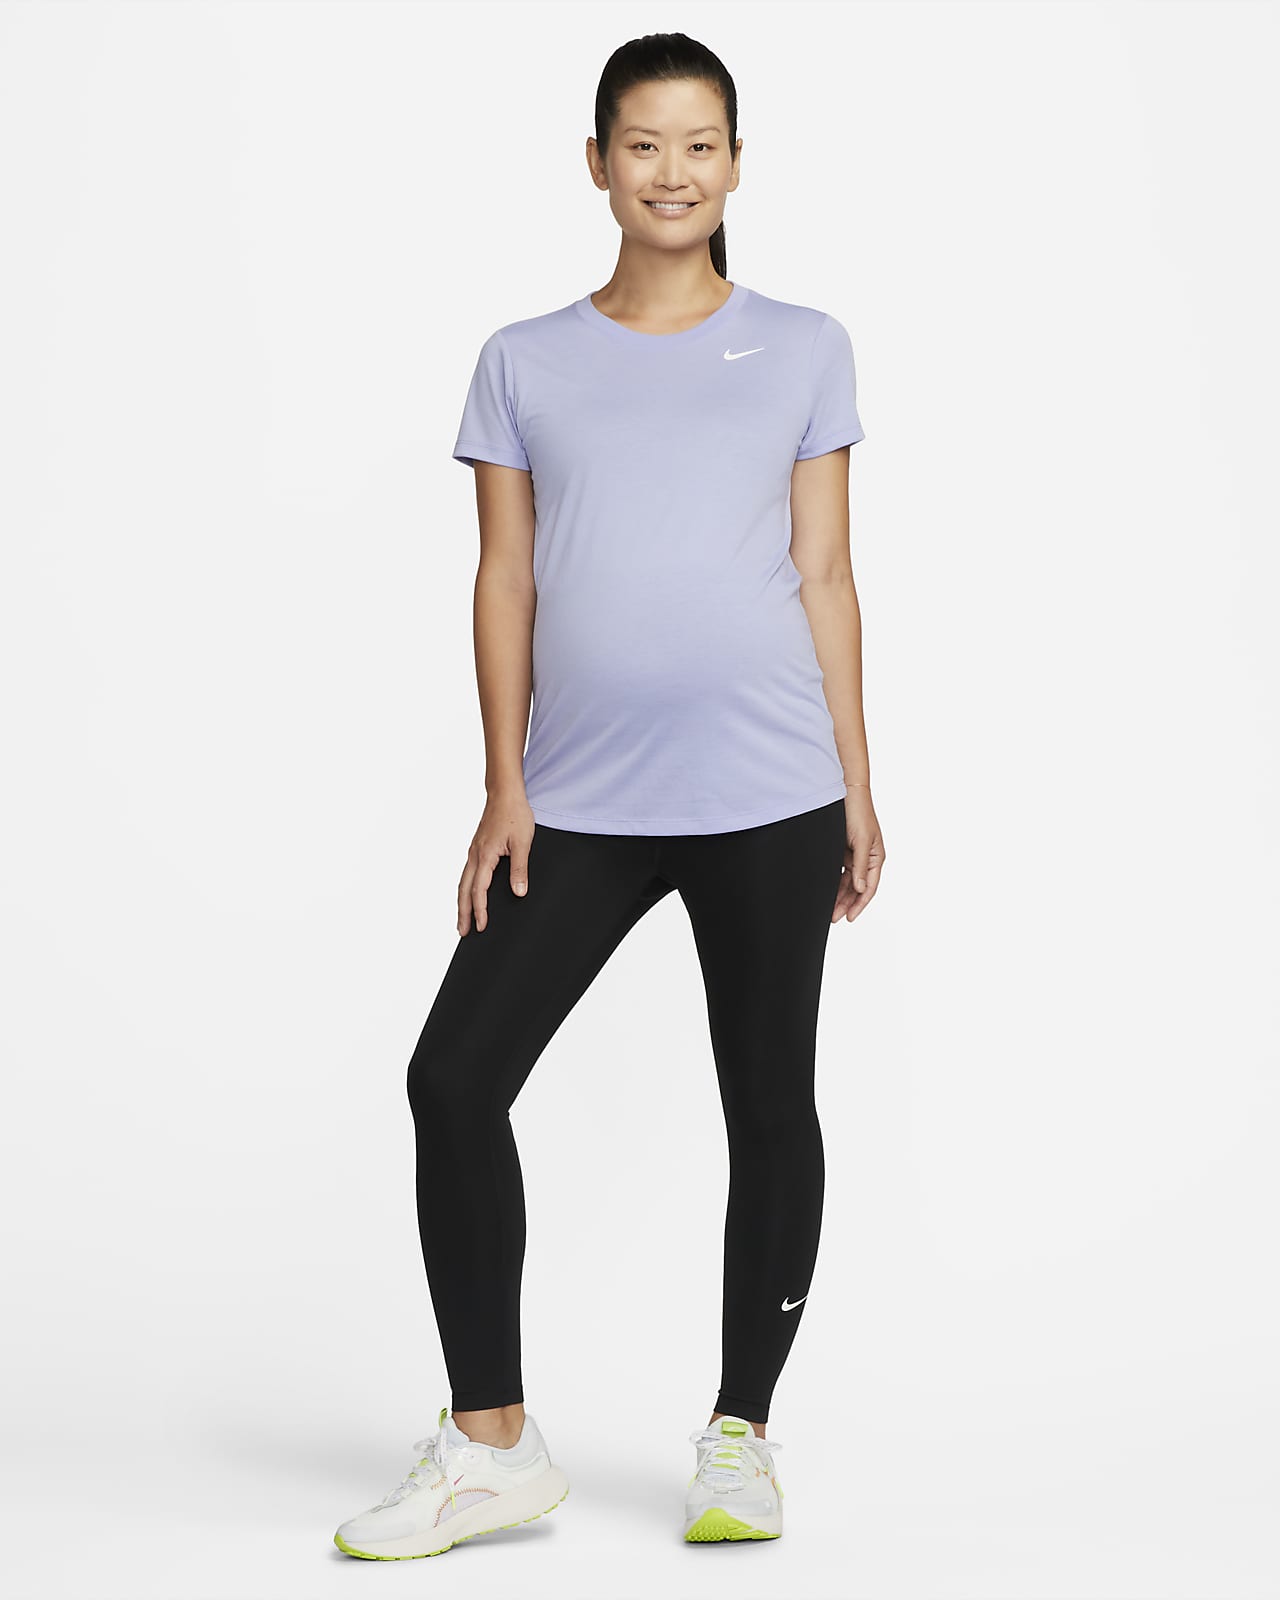 Best Maternity Workout Clothes - Nike One Women's High-Waisted